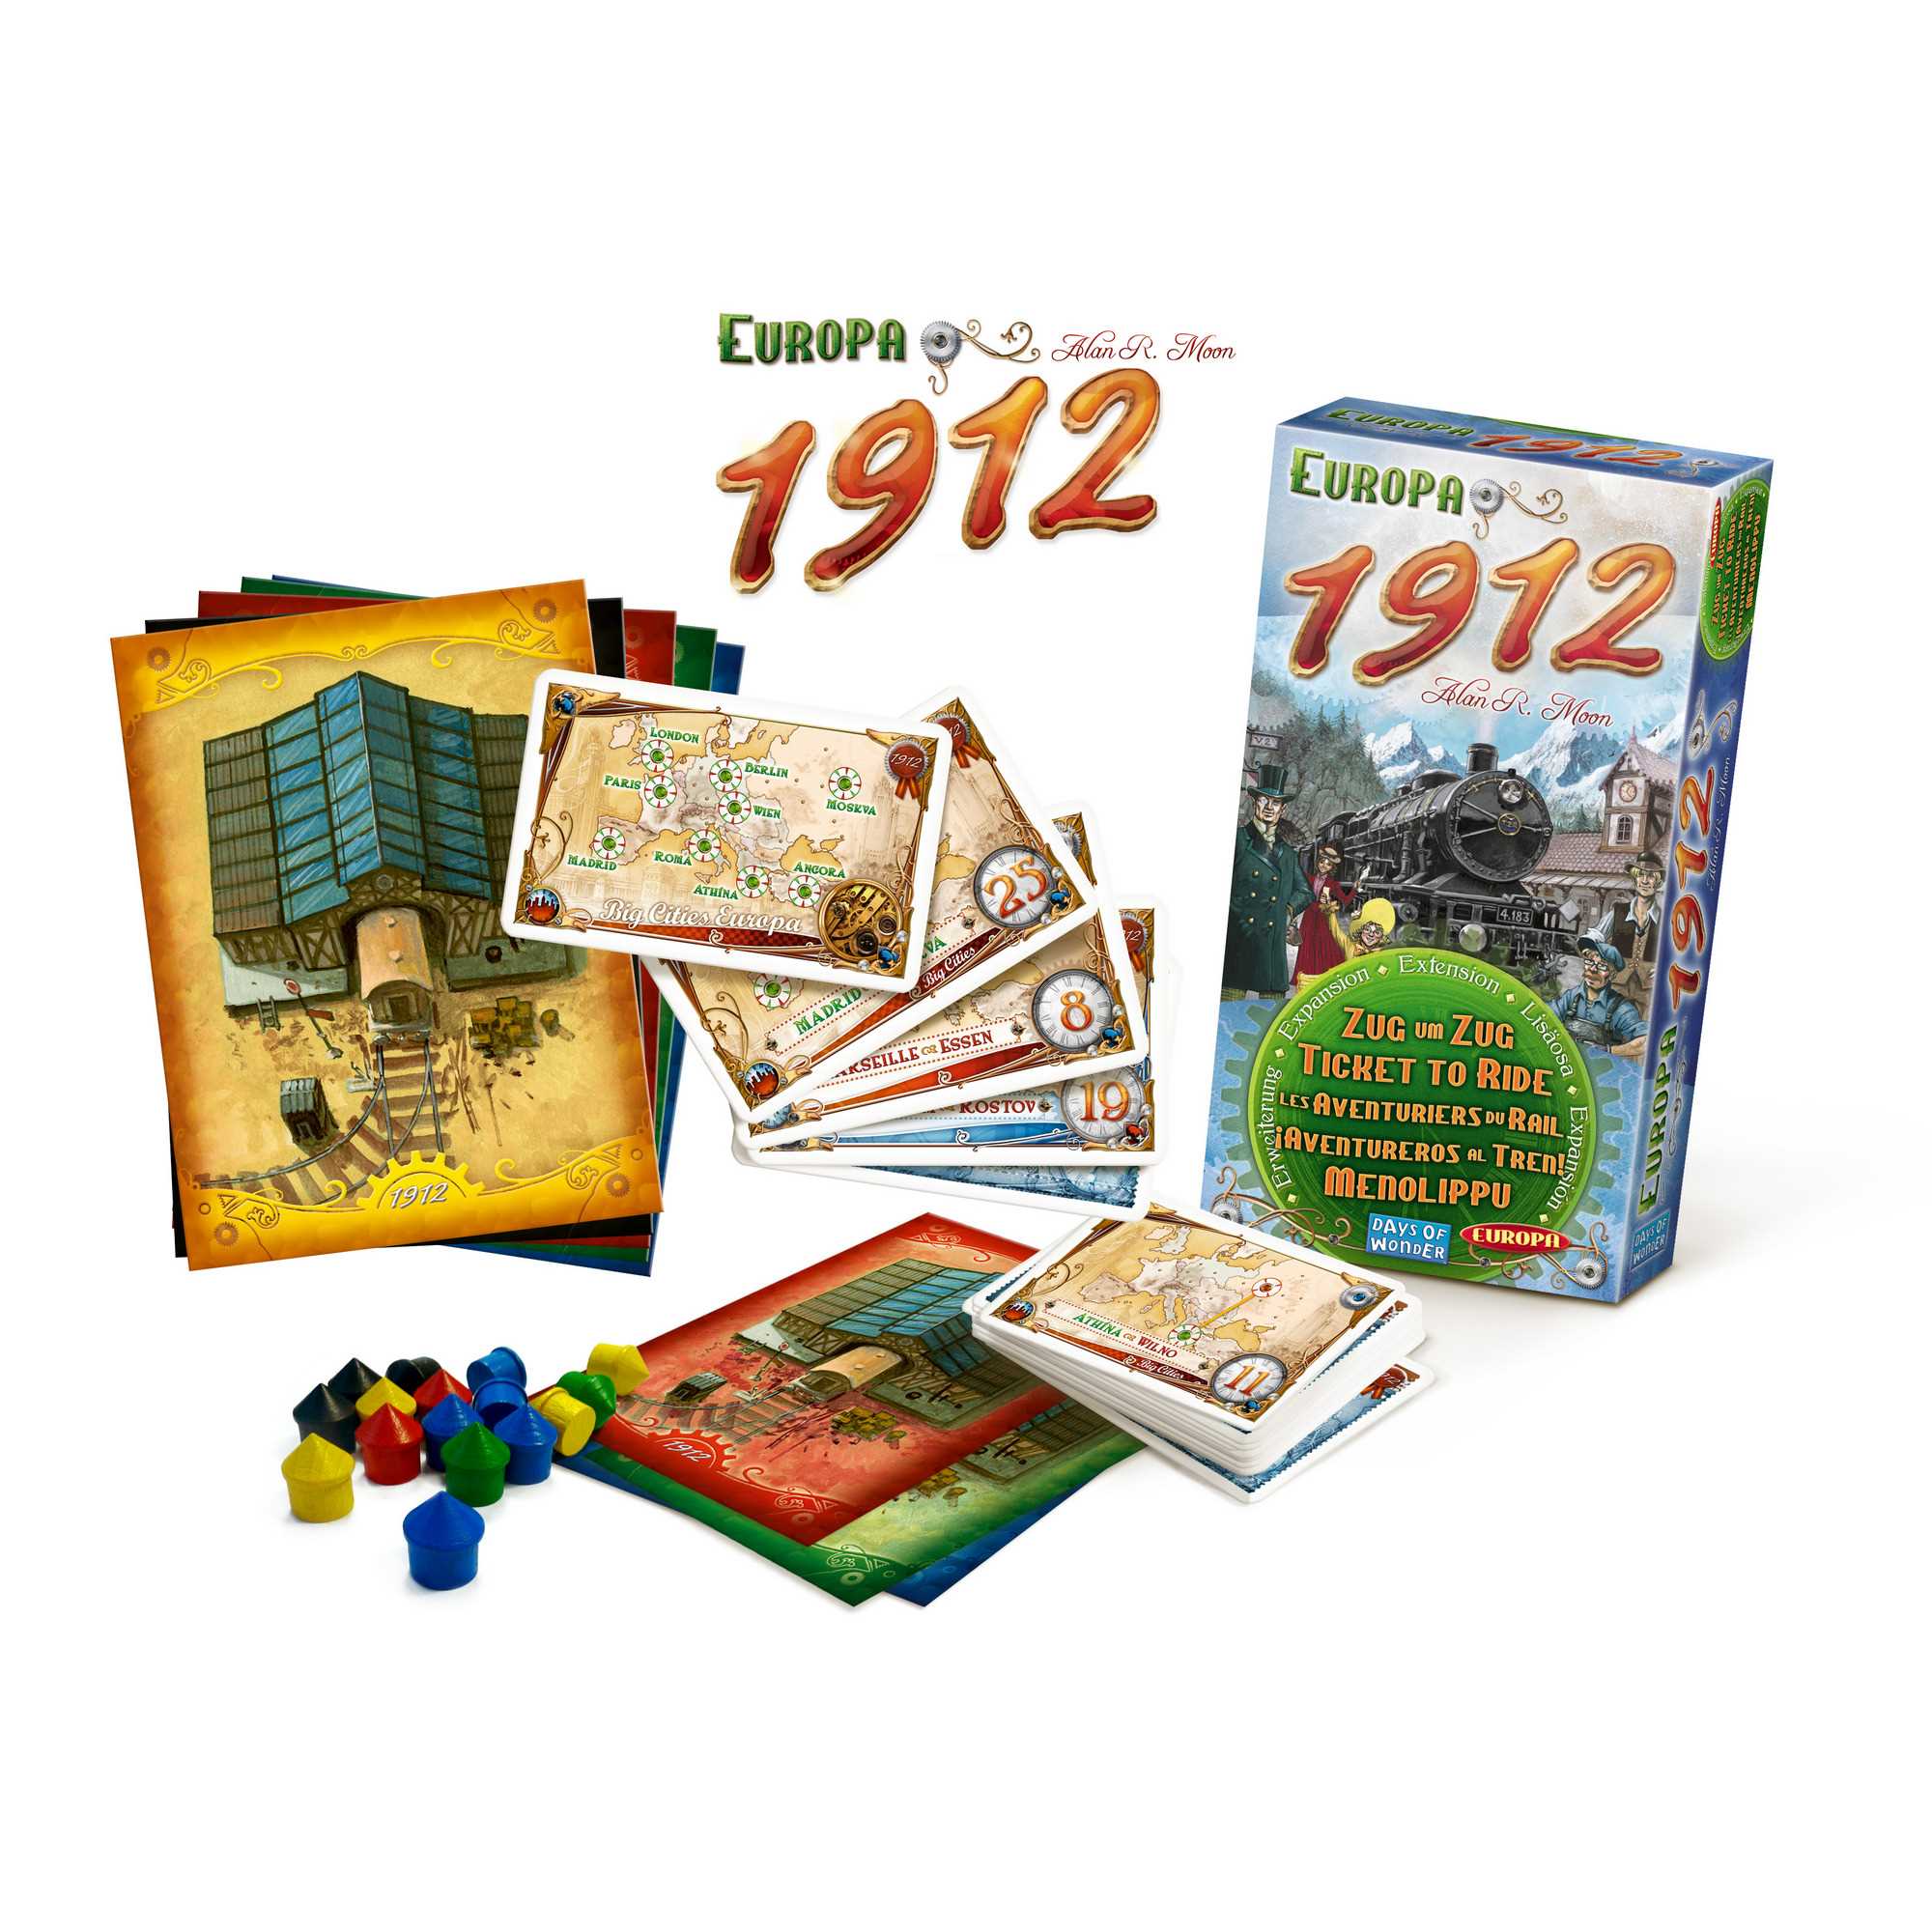 Ticket to Ride: Europe 1912 Expansion